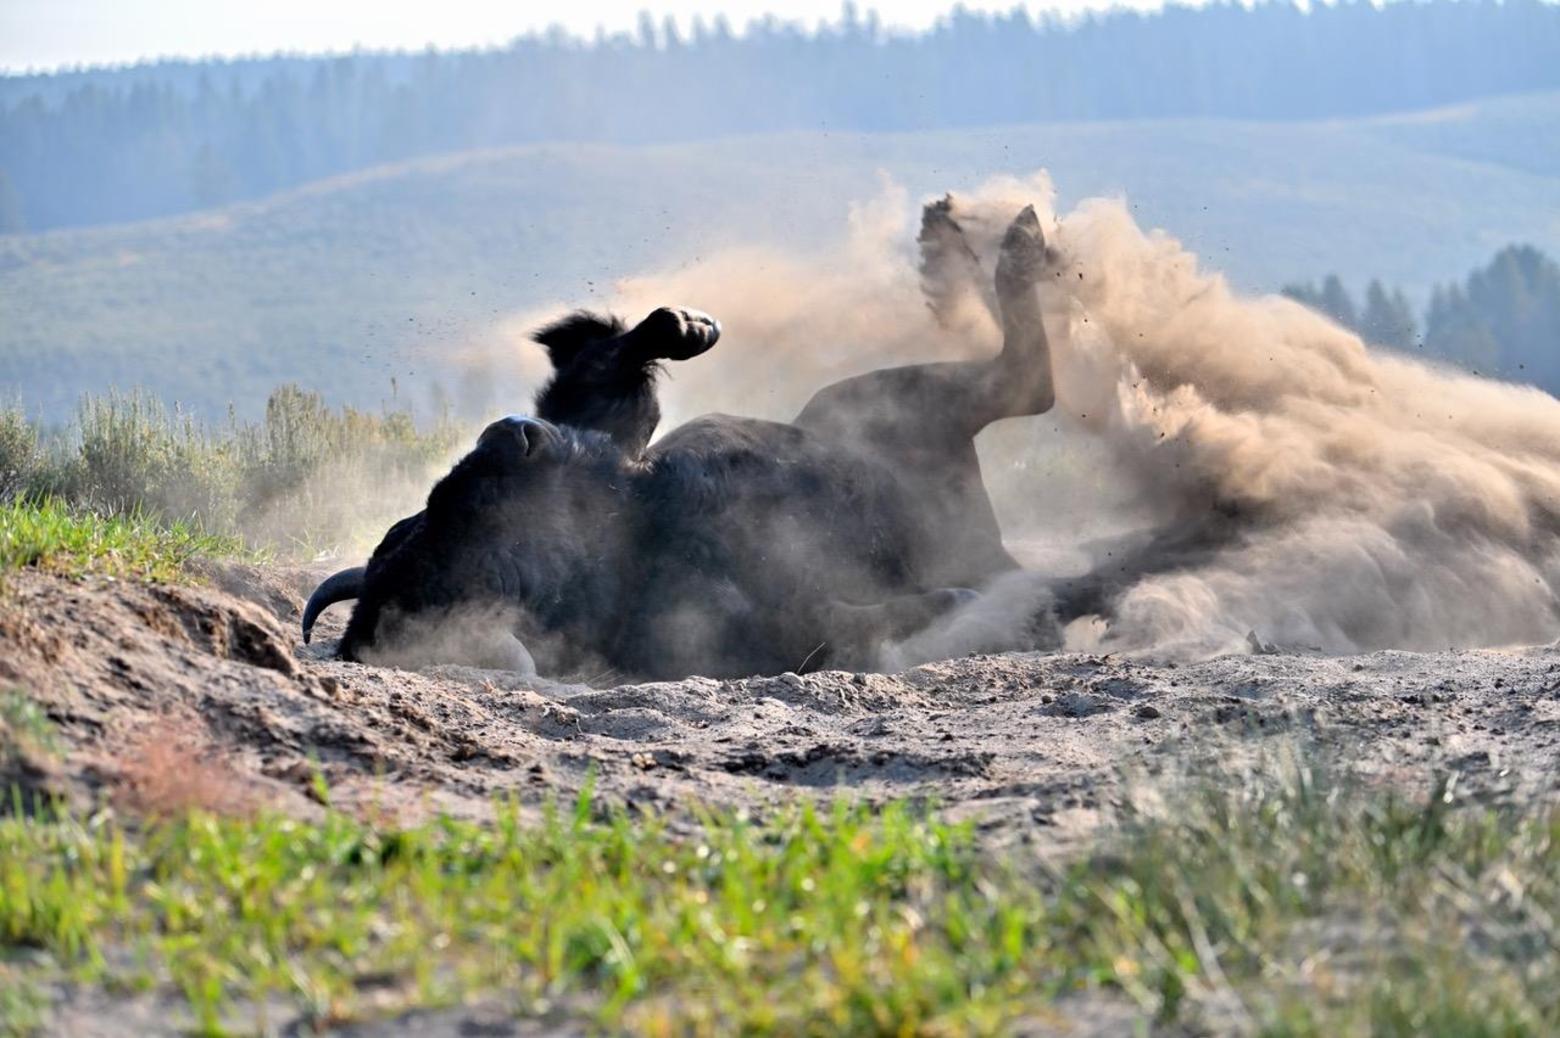 Meanwhile, as the elk people ready for their rut, the mating season of the bison people continues. Here a mature bull enjoys a dust wallow roll—a frequent pleasure during their mating season. The bison rut is well past its peak but still there will be rigorous days of collective excitement and sometimes violent episodes between bulls for a while yet. Until recently,  late in this year's calving season, a few little tardy orange calves were being born, the late fruit of last year's rut.